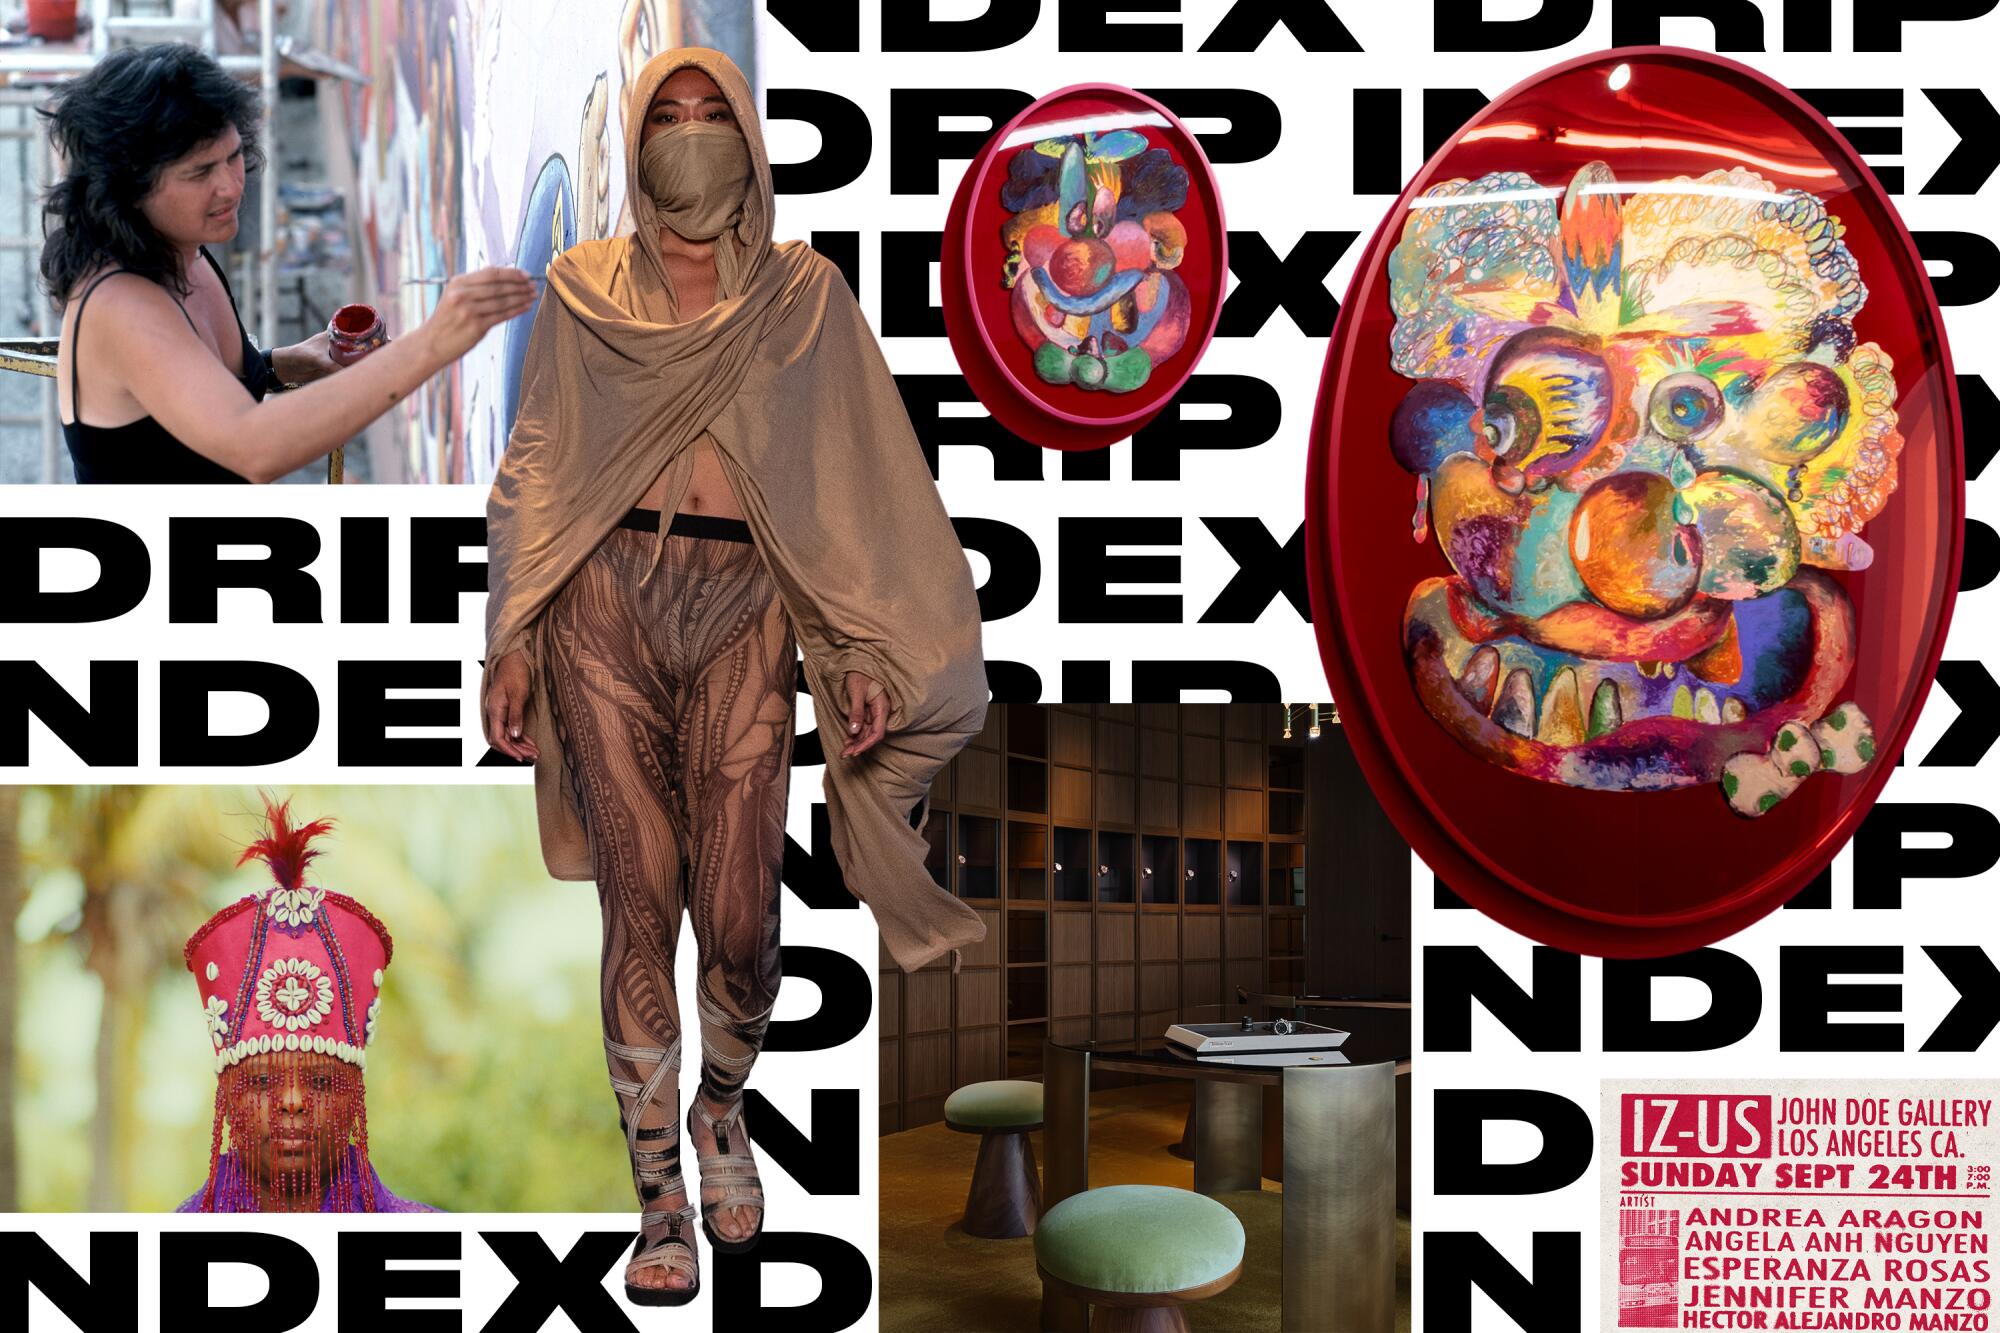 A collage of fashion, furniture and artifacts